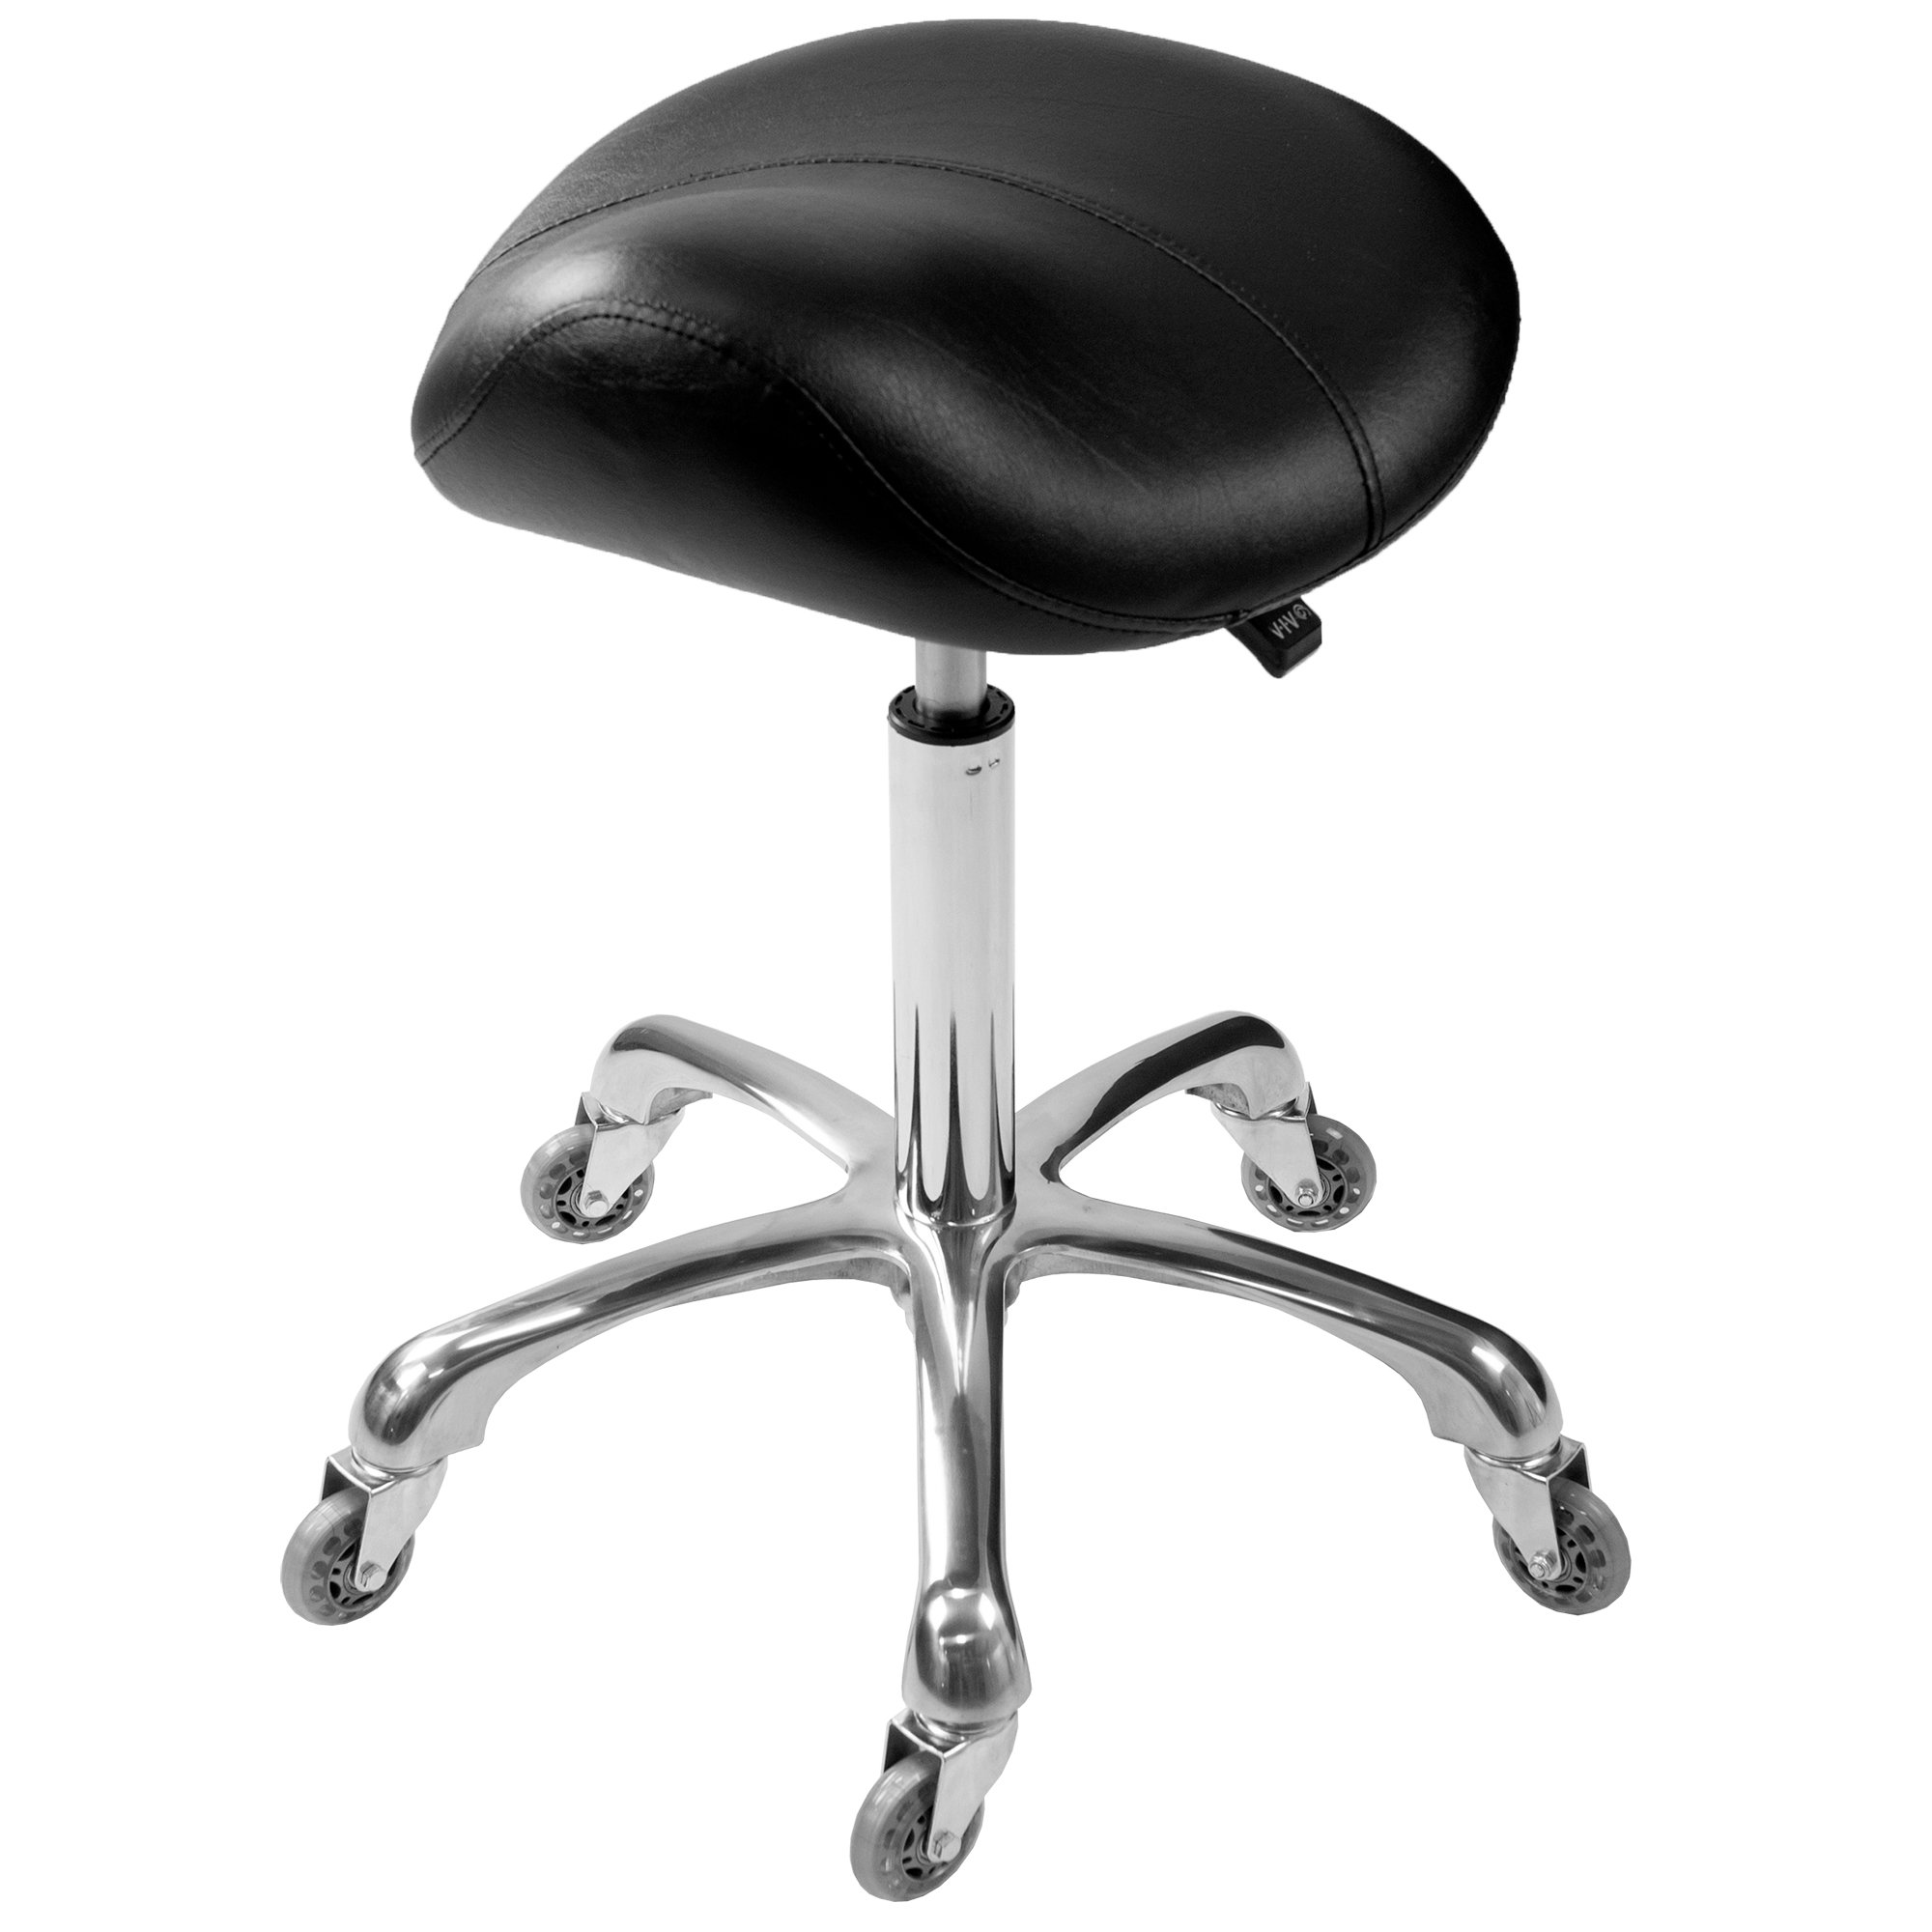 vivo Ergonomic Wooden Kneeling Chair, Adjustable Stool for Home and Office